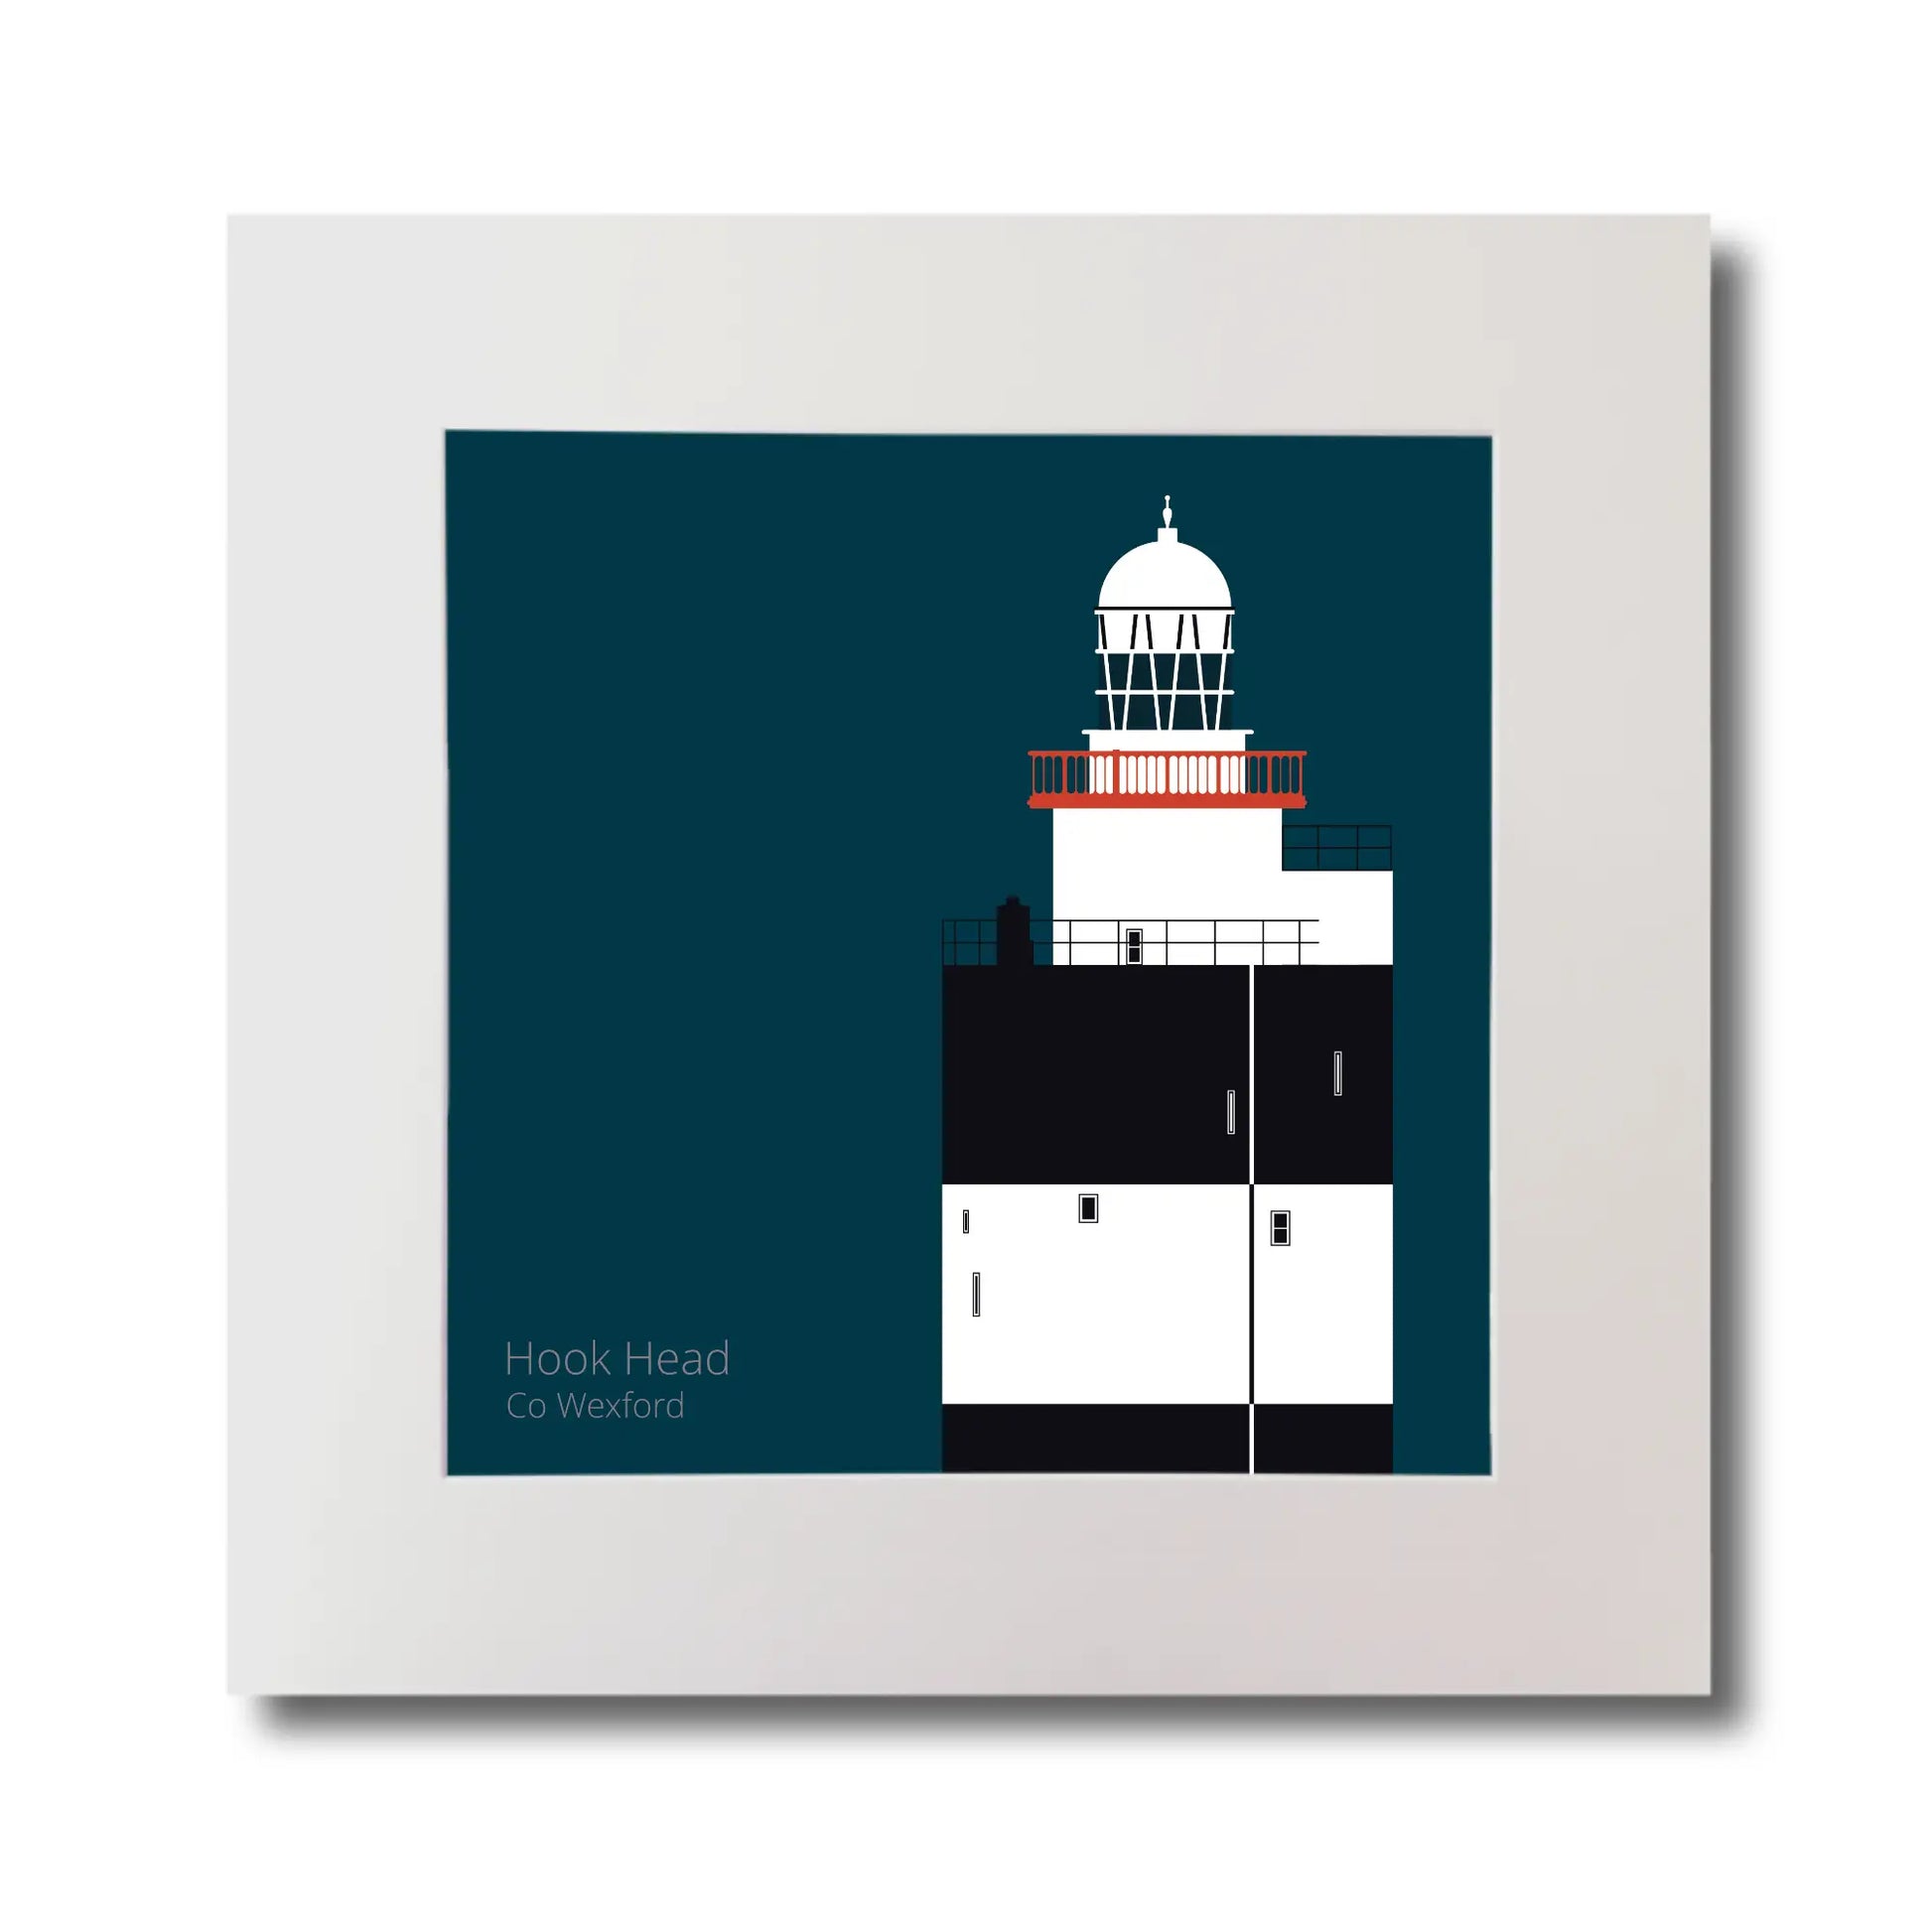 Illustration of Hook Head lighthouse on a midnight blue background, mounted and measuring 30x30cm.